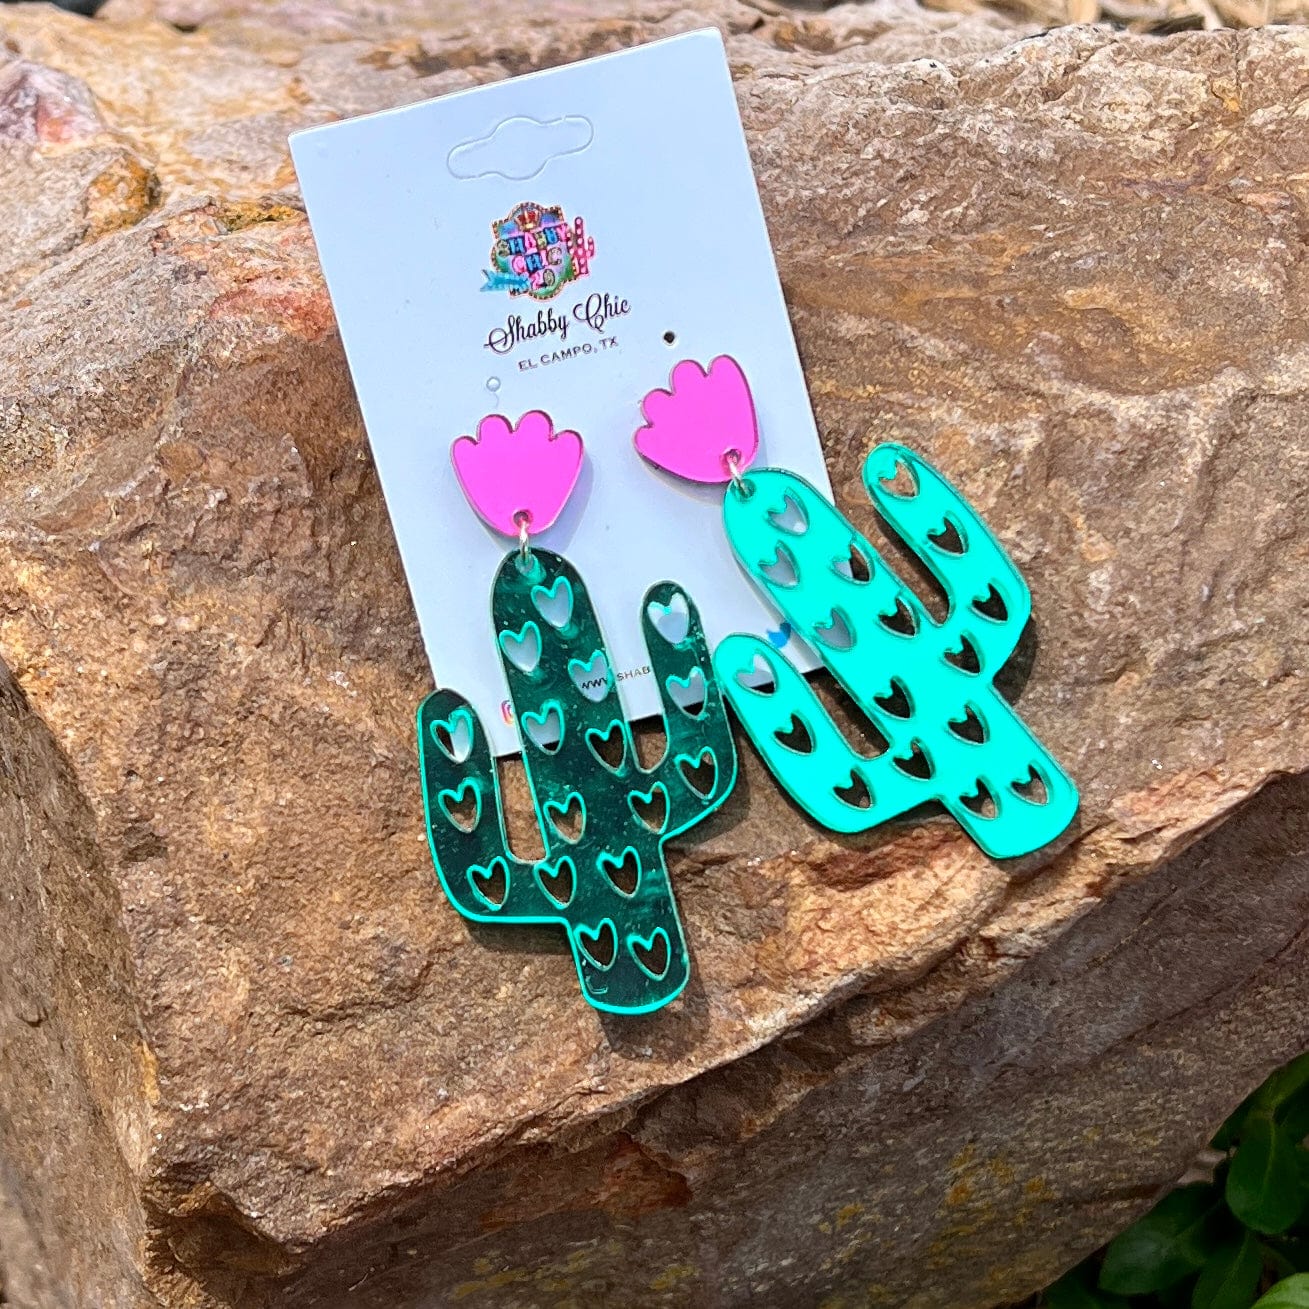 Cactus Blossom Earrings Shabby Chic Boutique and Tanning Salon Green